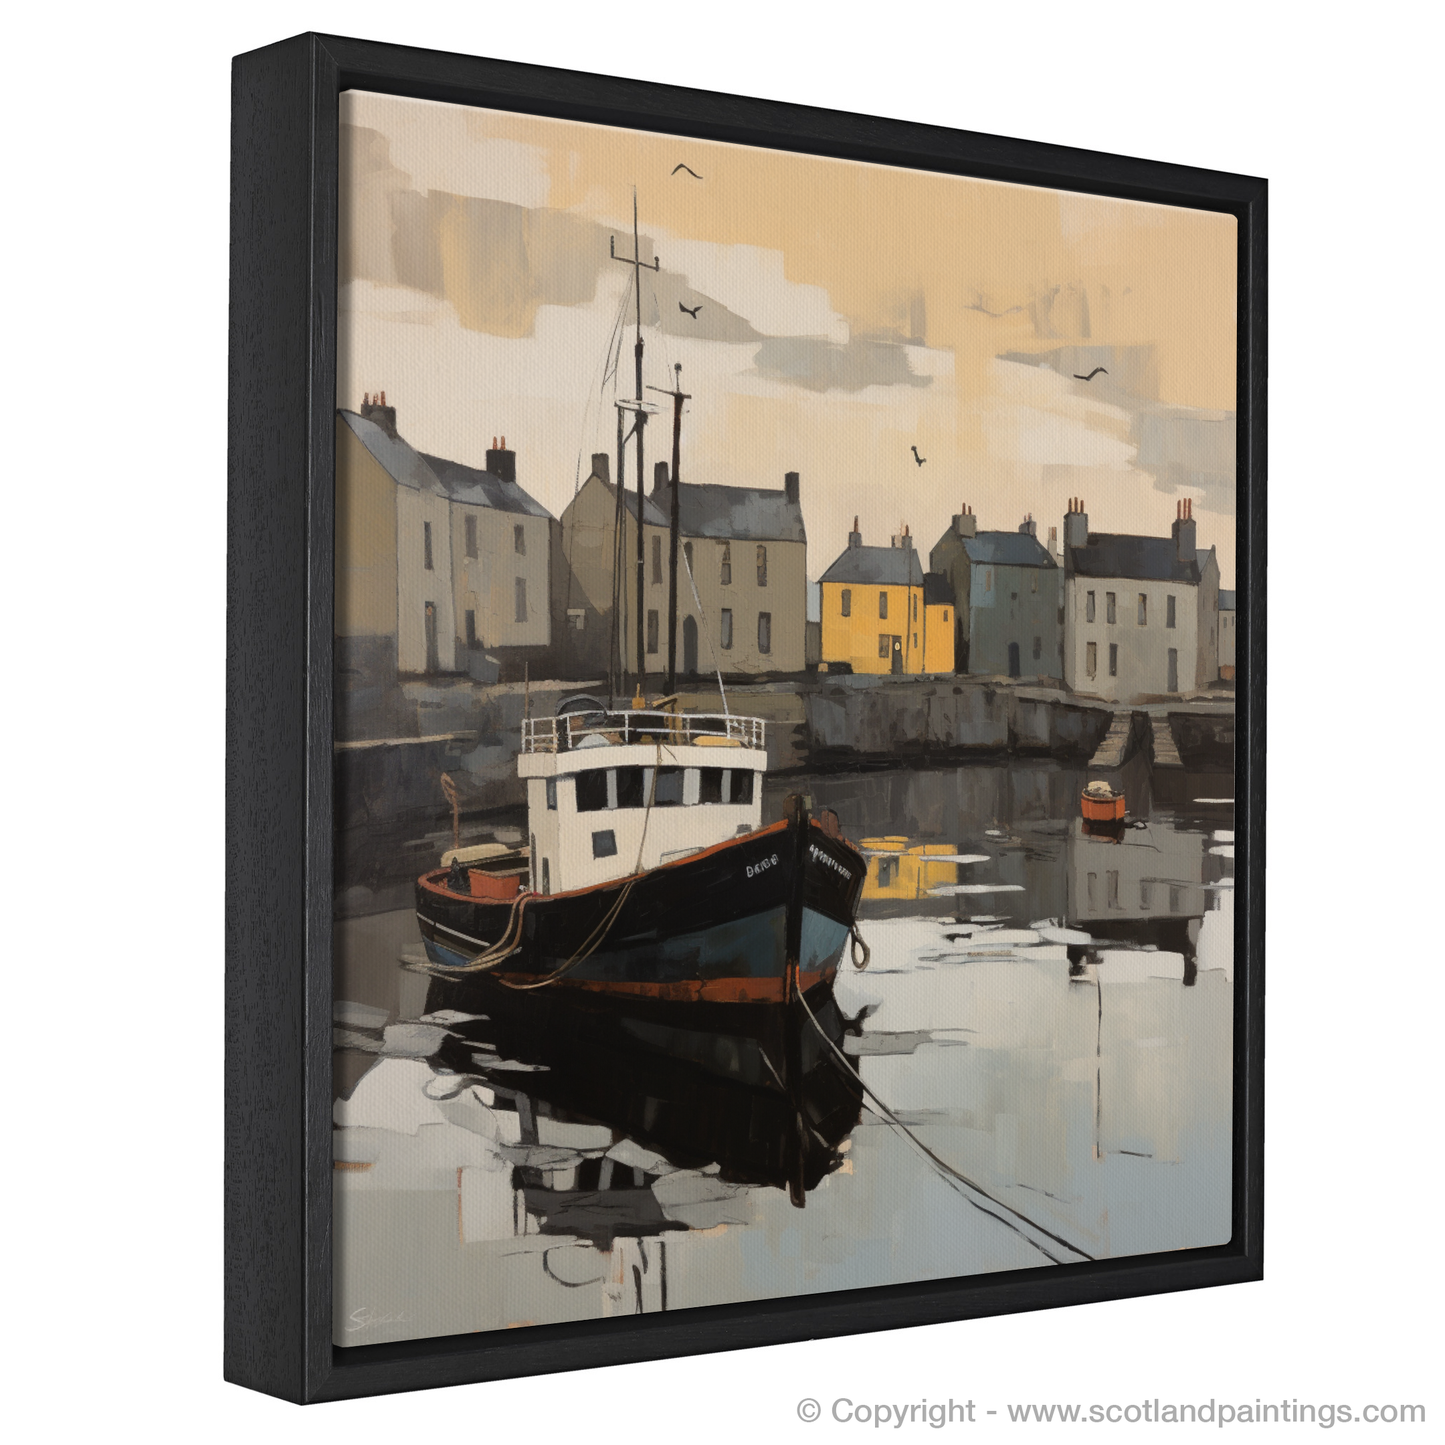 Painting and Art Print of Stornoway Harbour entitled "Stornoway Harbour: An Expressionist's Voyage".